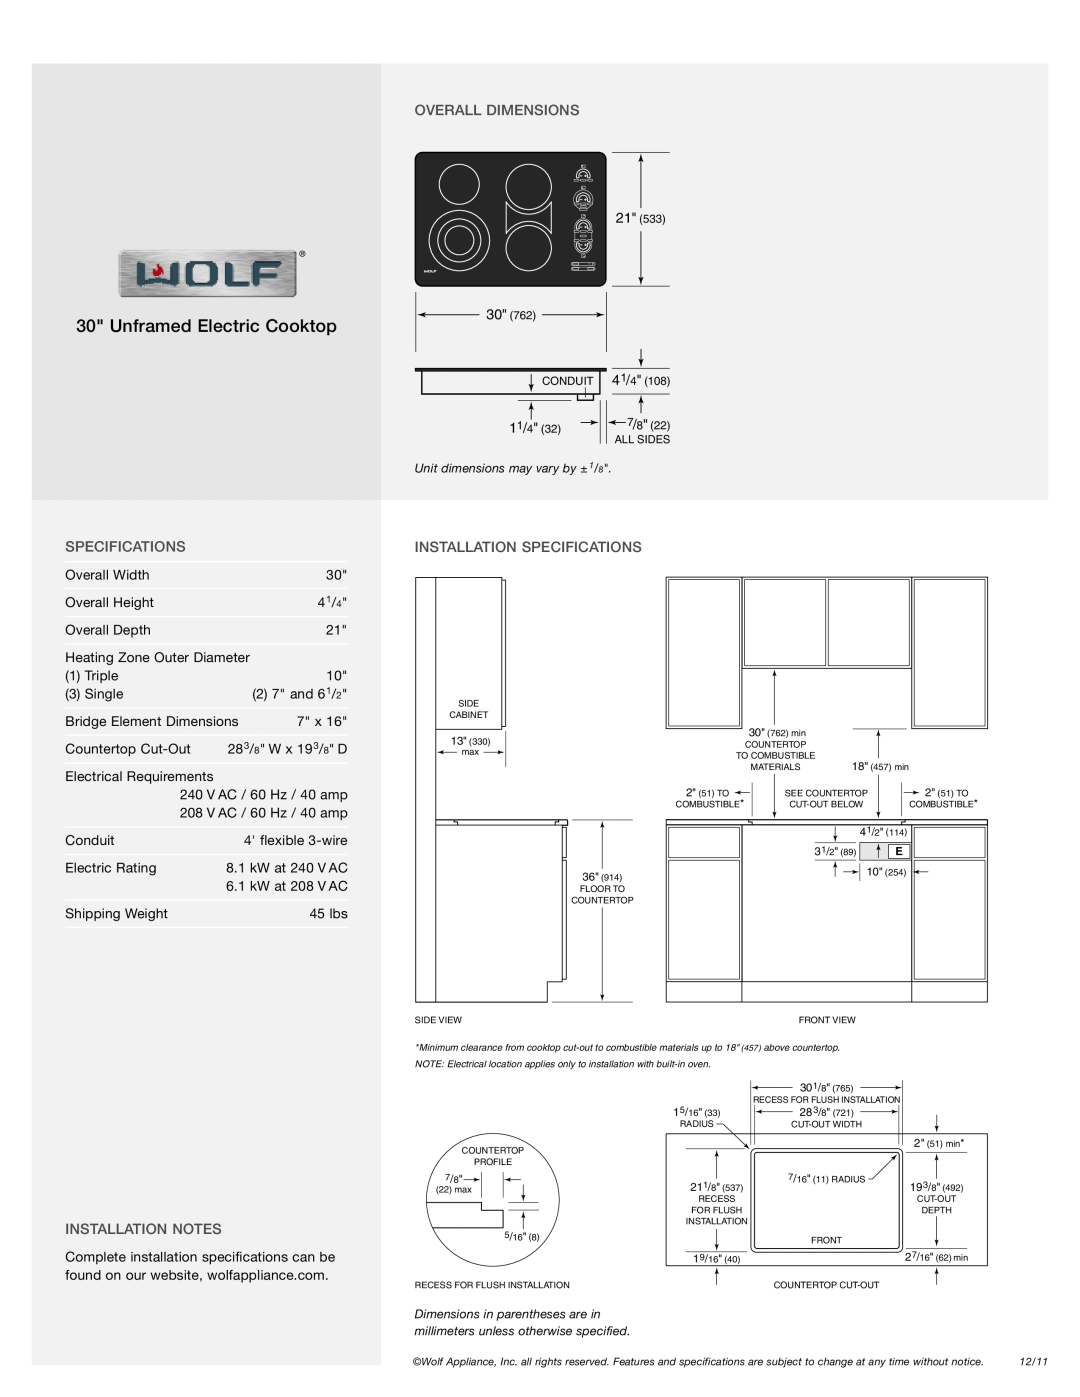 Wolf Appliance Company CT30EU manual Overall Dimensions, Specifications, Installation Notes, Unframed Electric Cooktop 